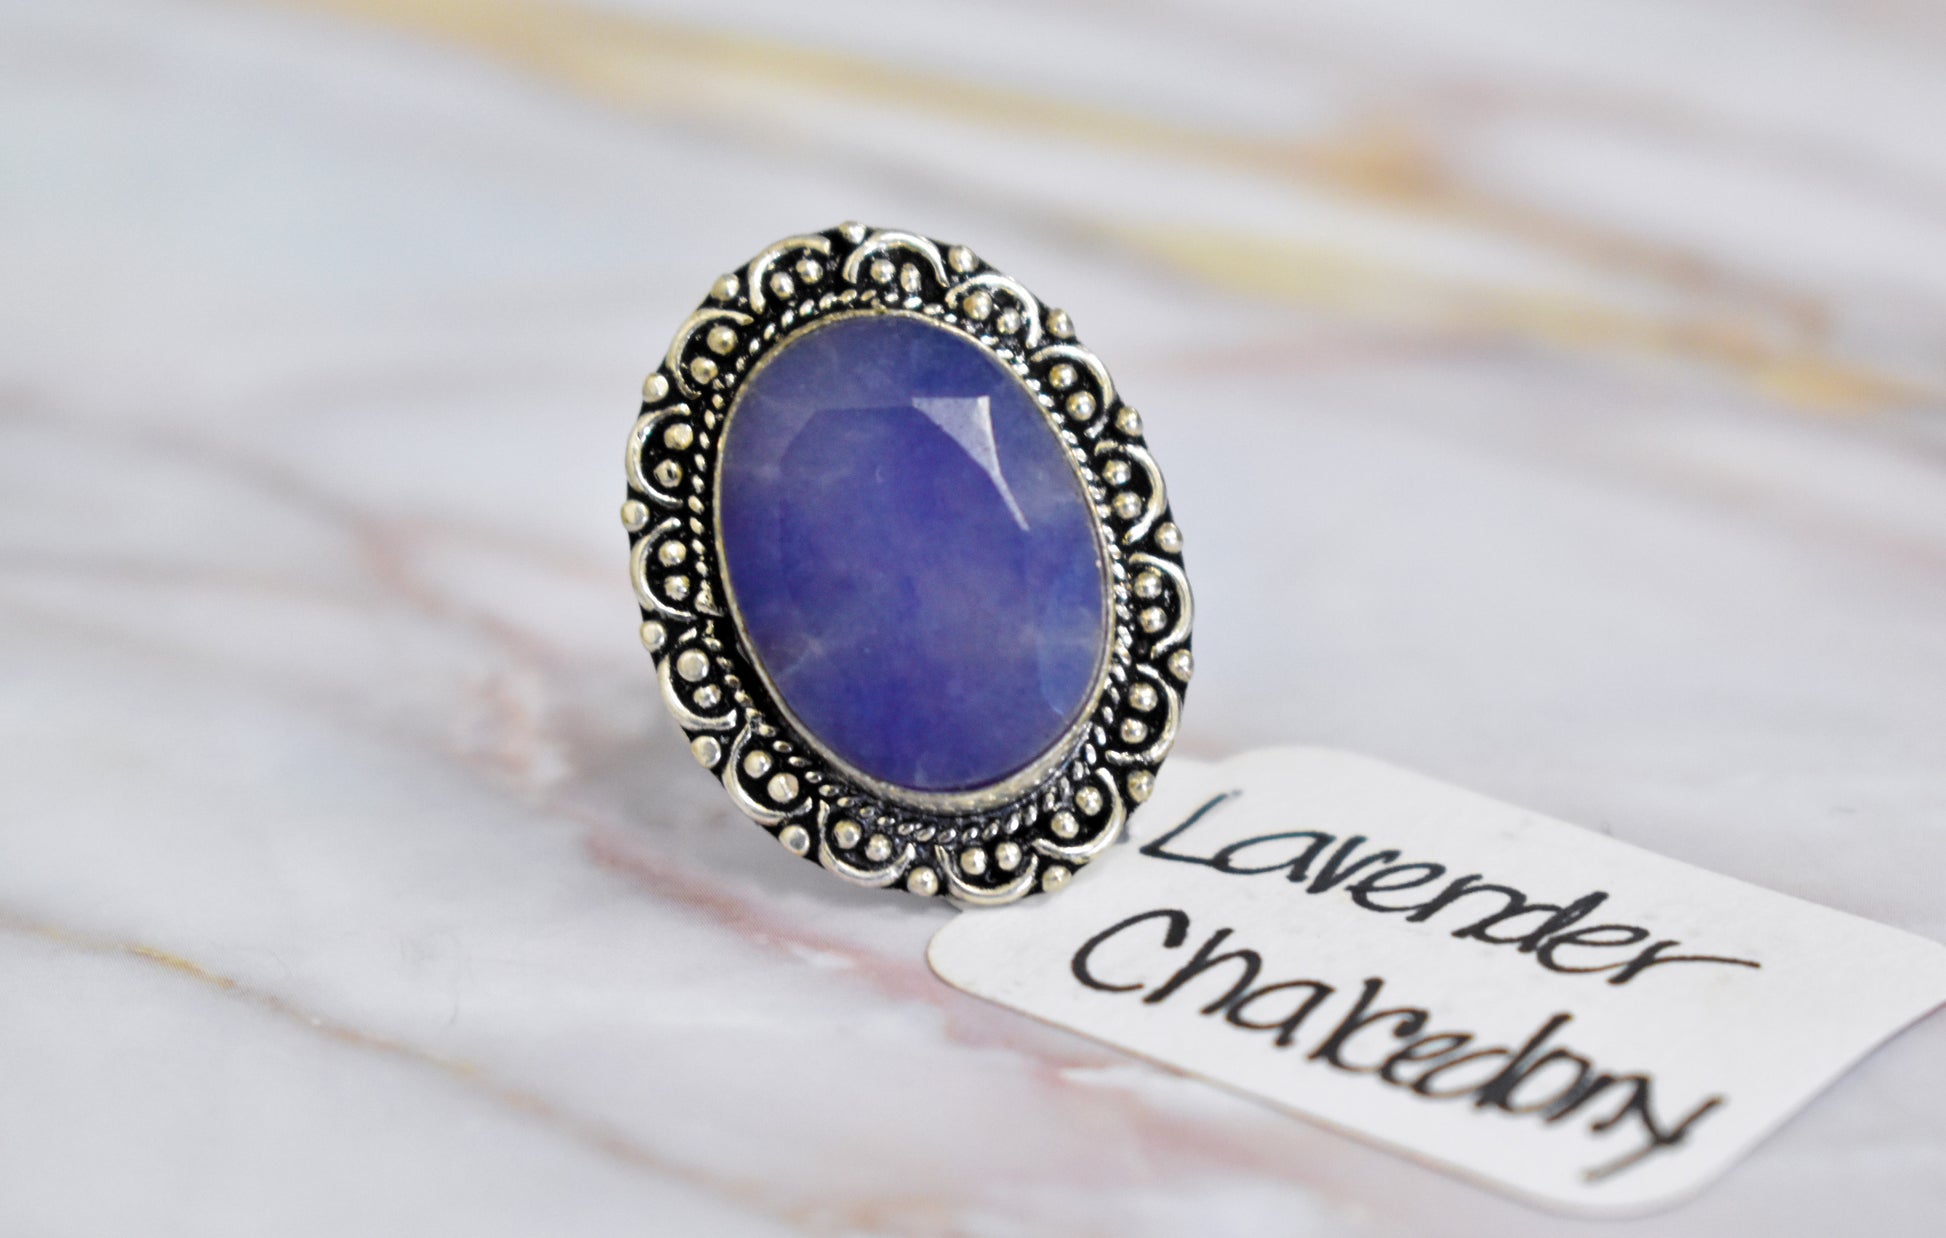 stones-of-transformation - Lavender Chalcedony Ring (Size 8.5) - Stones of Transformation - 